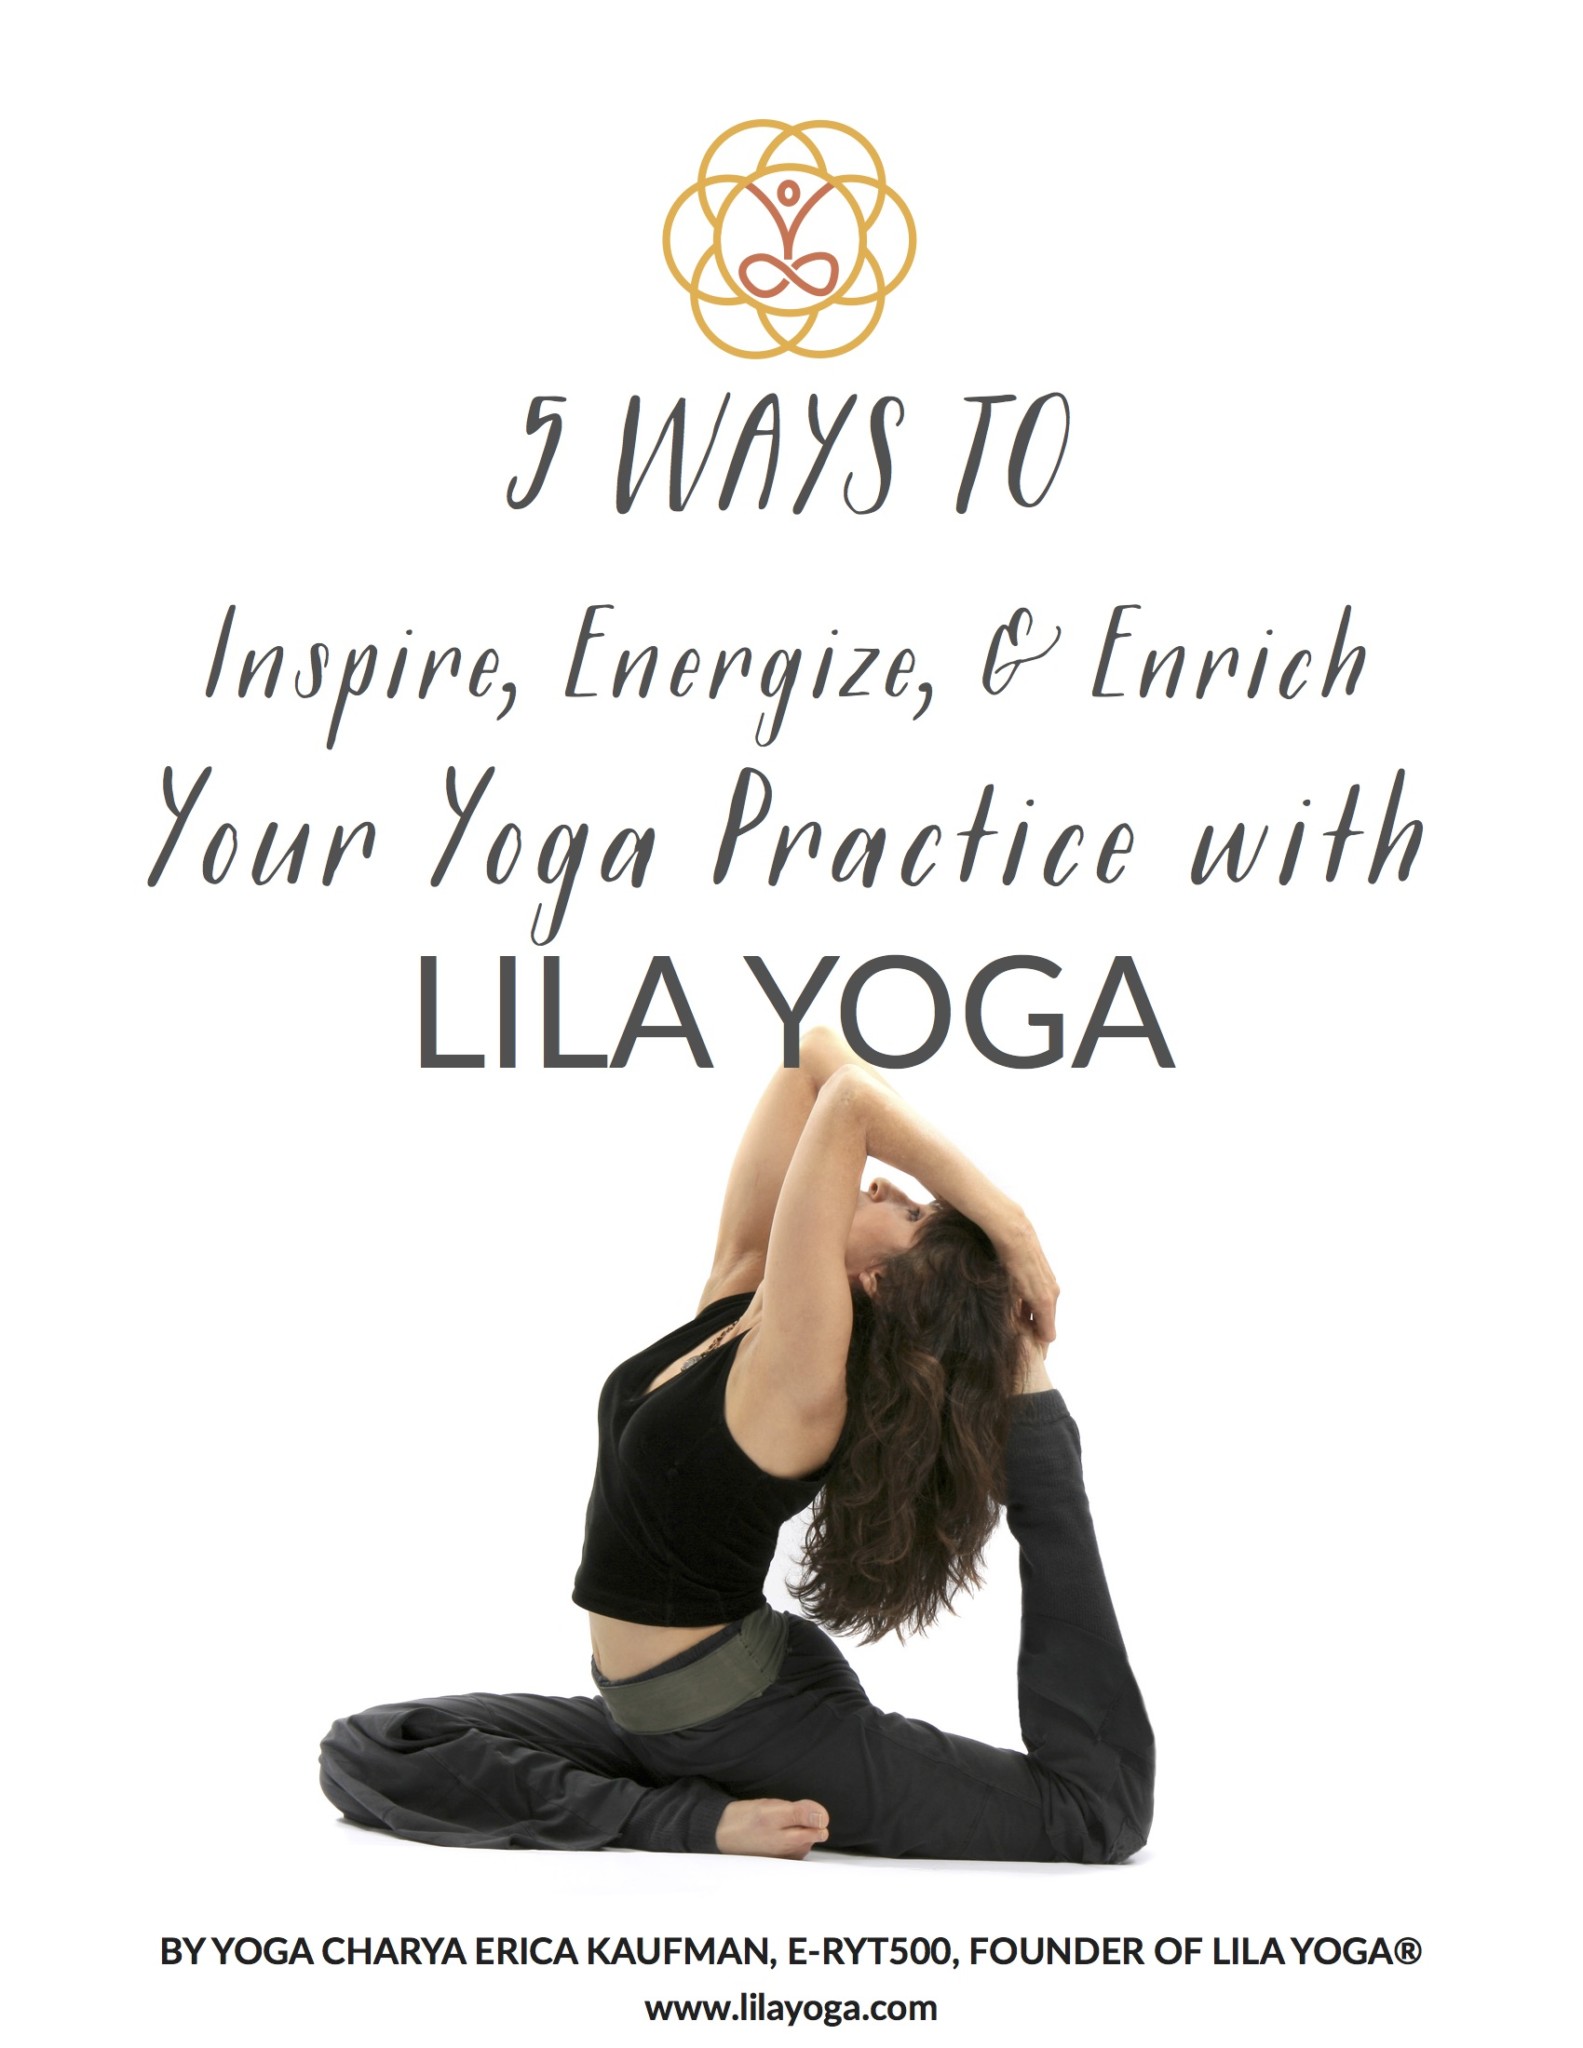 About Lila Lolling  Yoga Philosophy, Eco Yoga, and Author